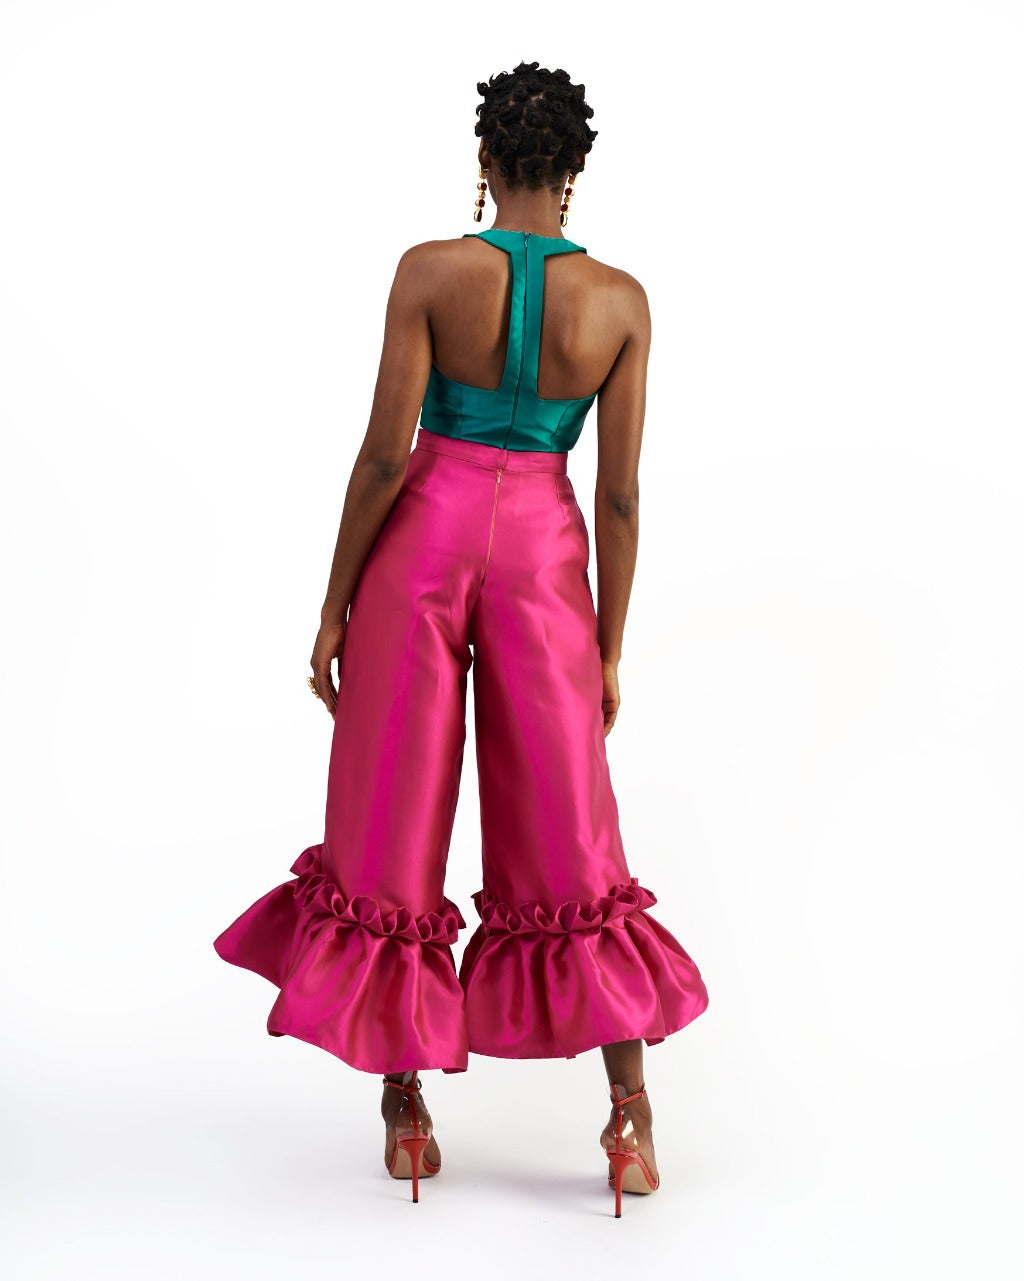 The back of a model wearing a green silk satin top and magenta silk satin pants with ruffle hem culottes